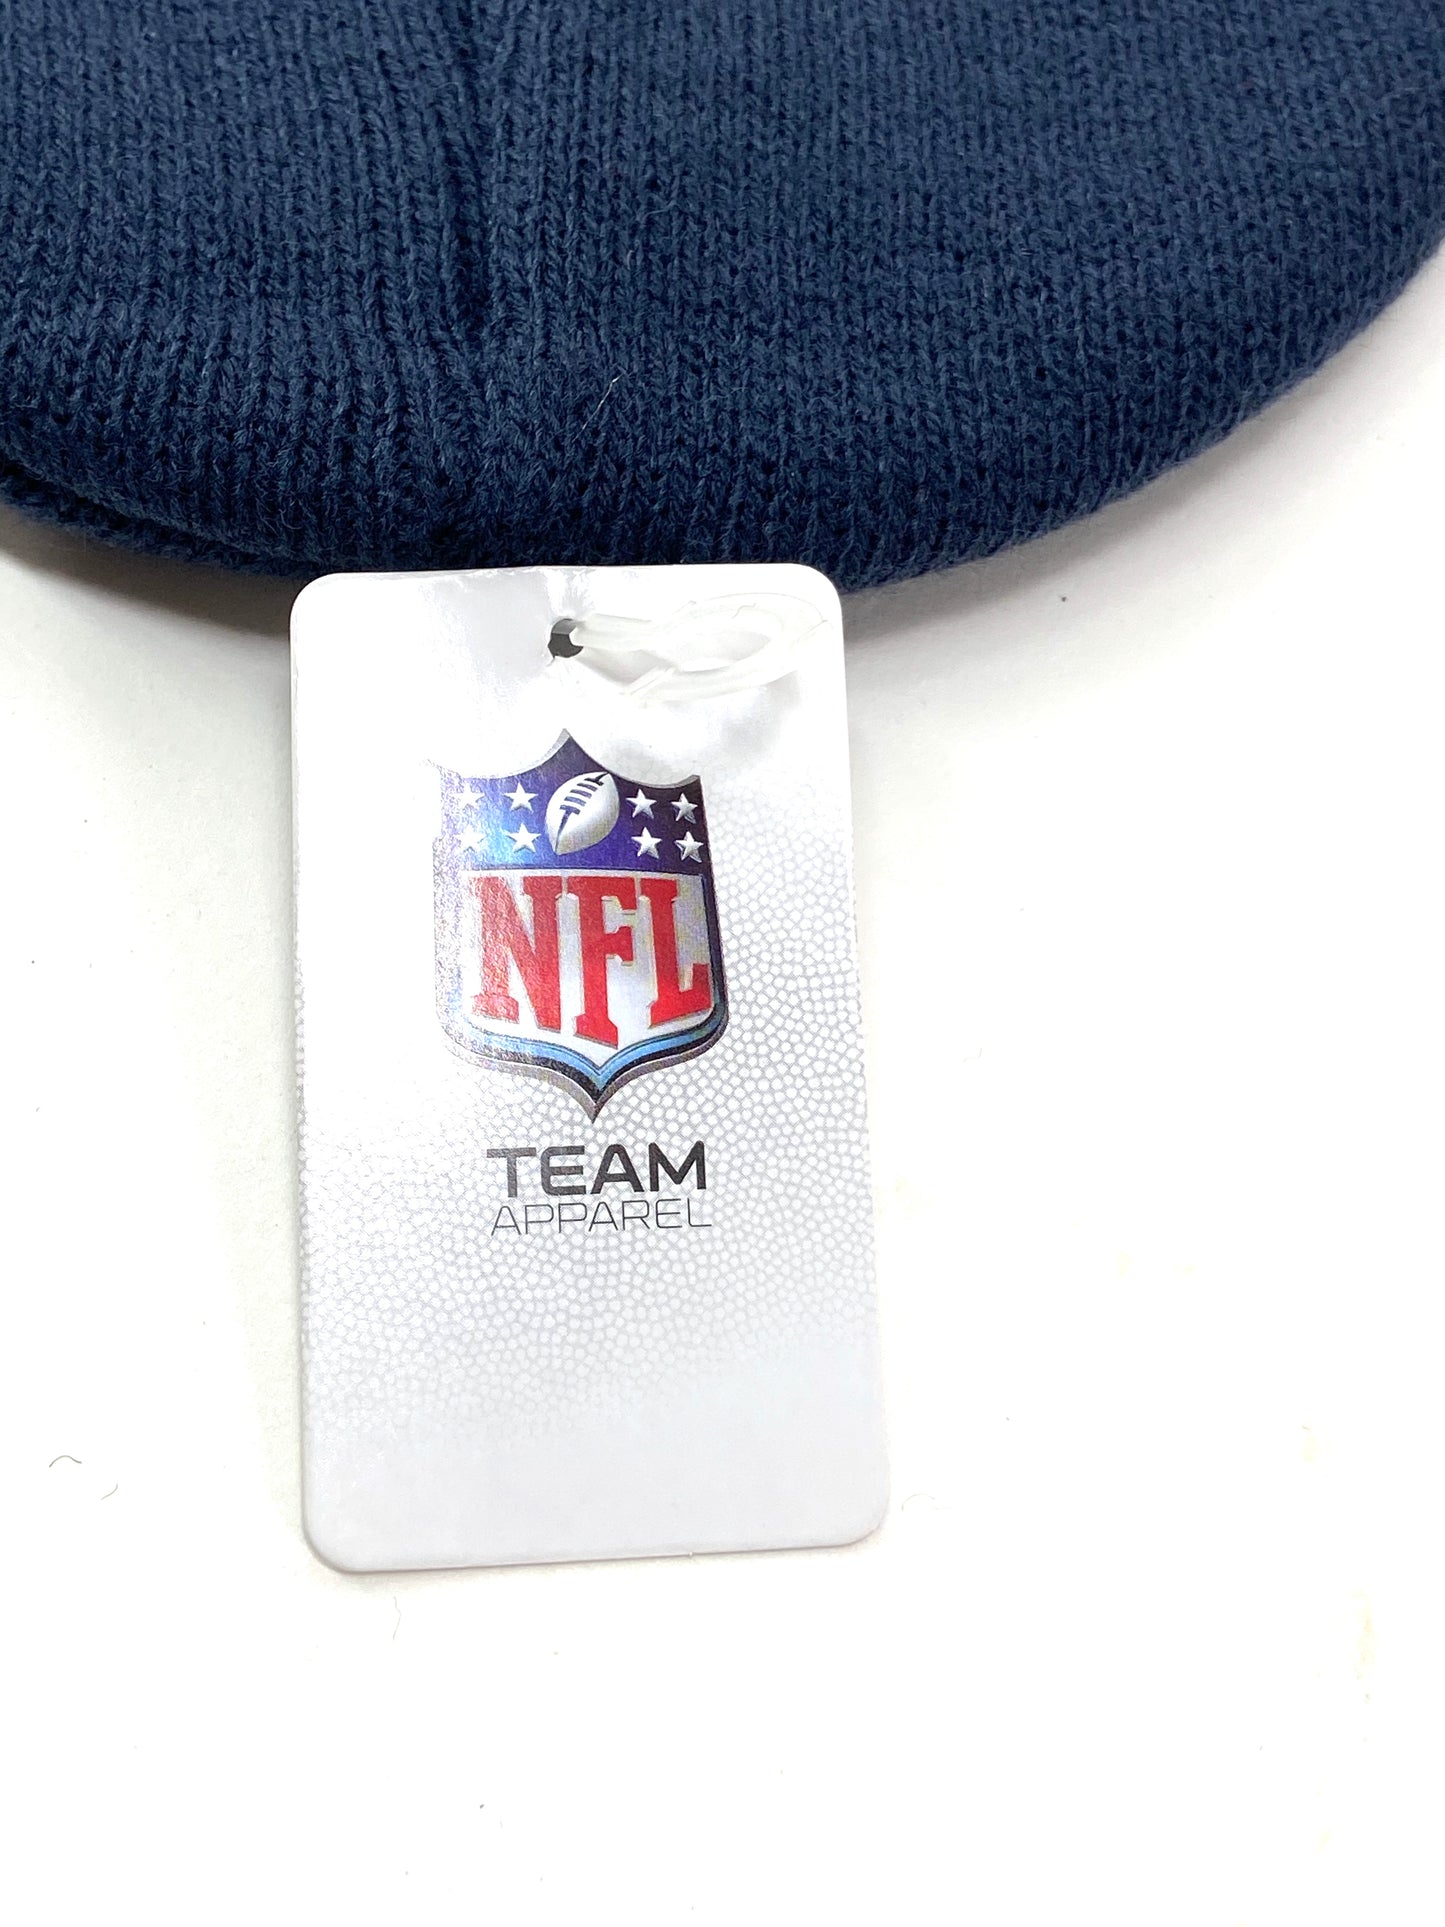 St. Louis Rams NFL Acrylic Knit Hat by NFL Team Apparel